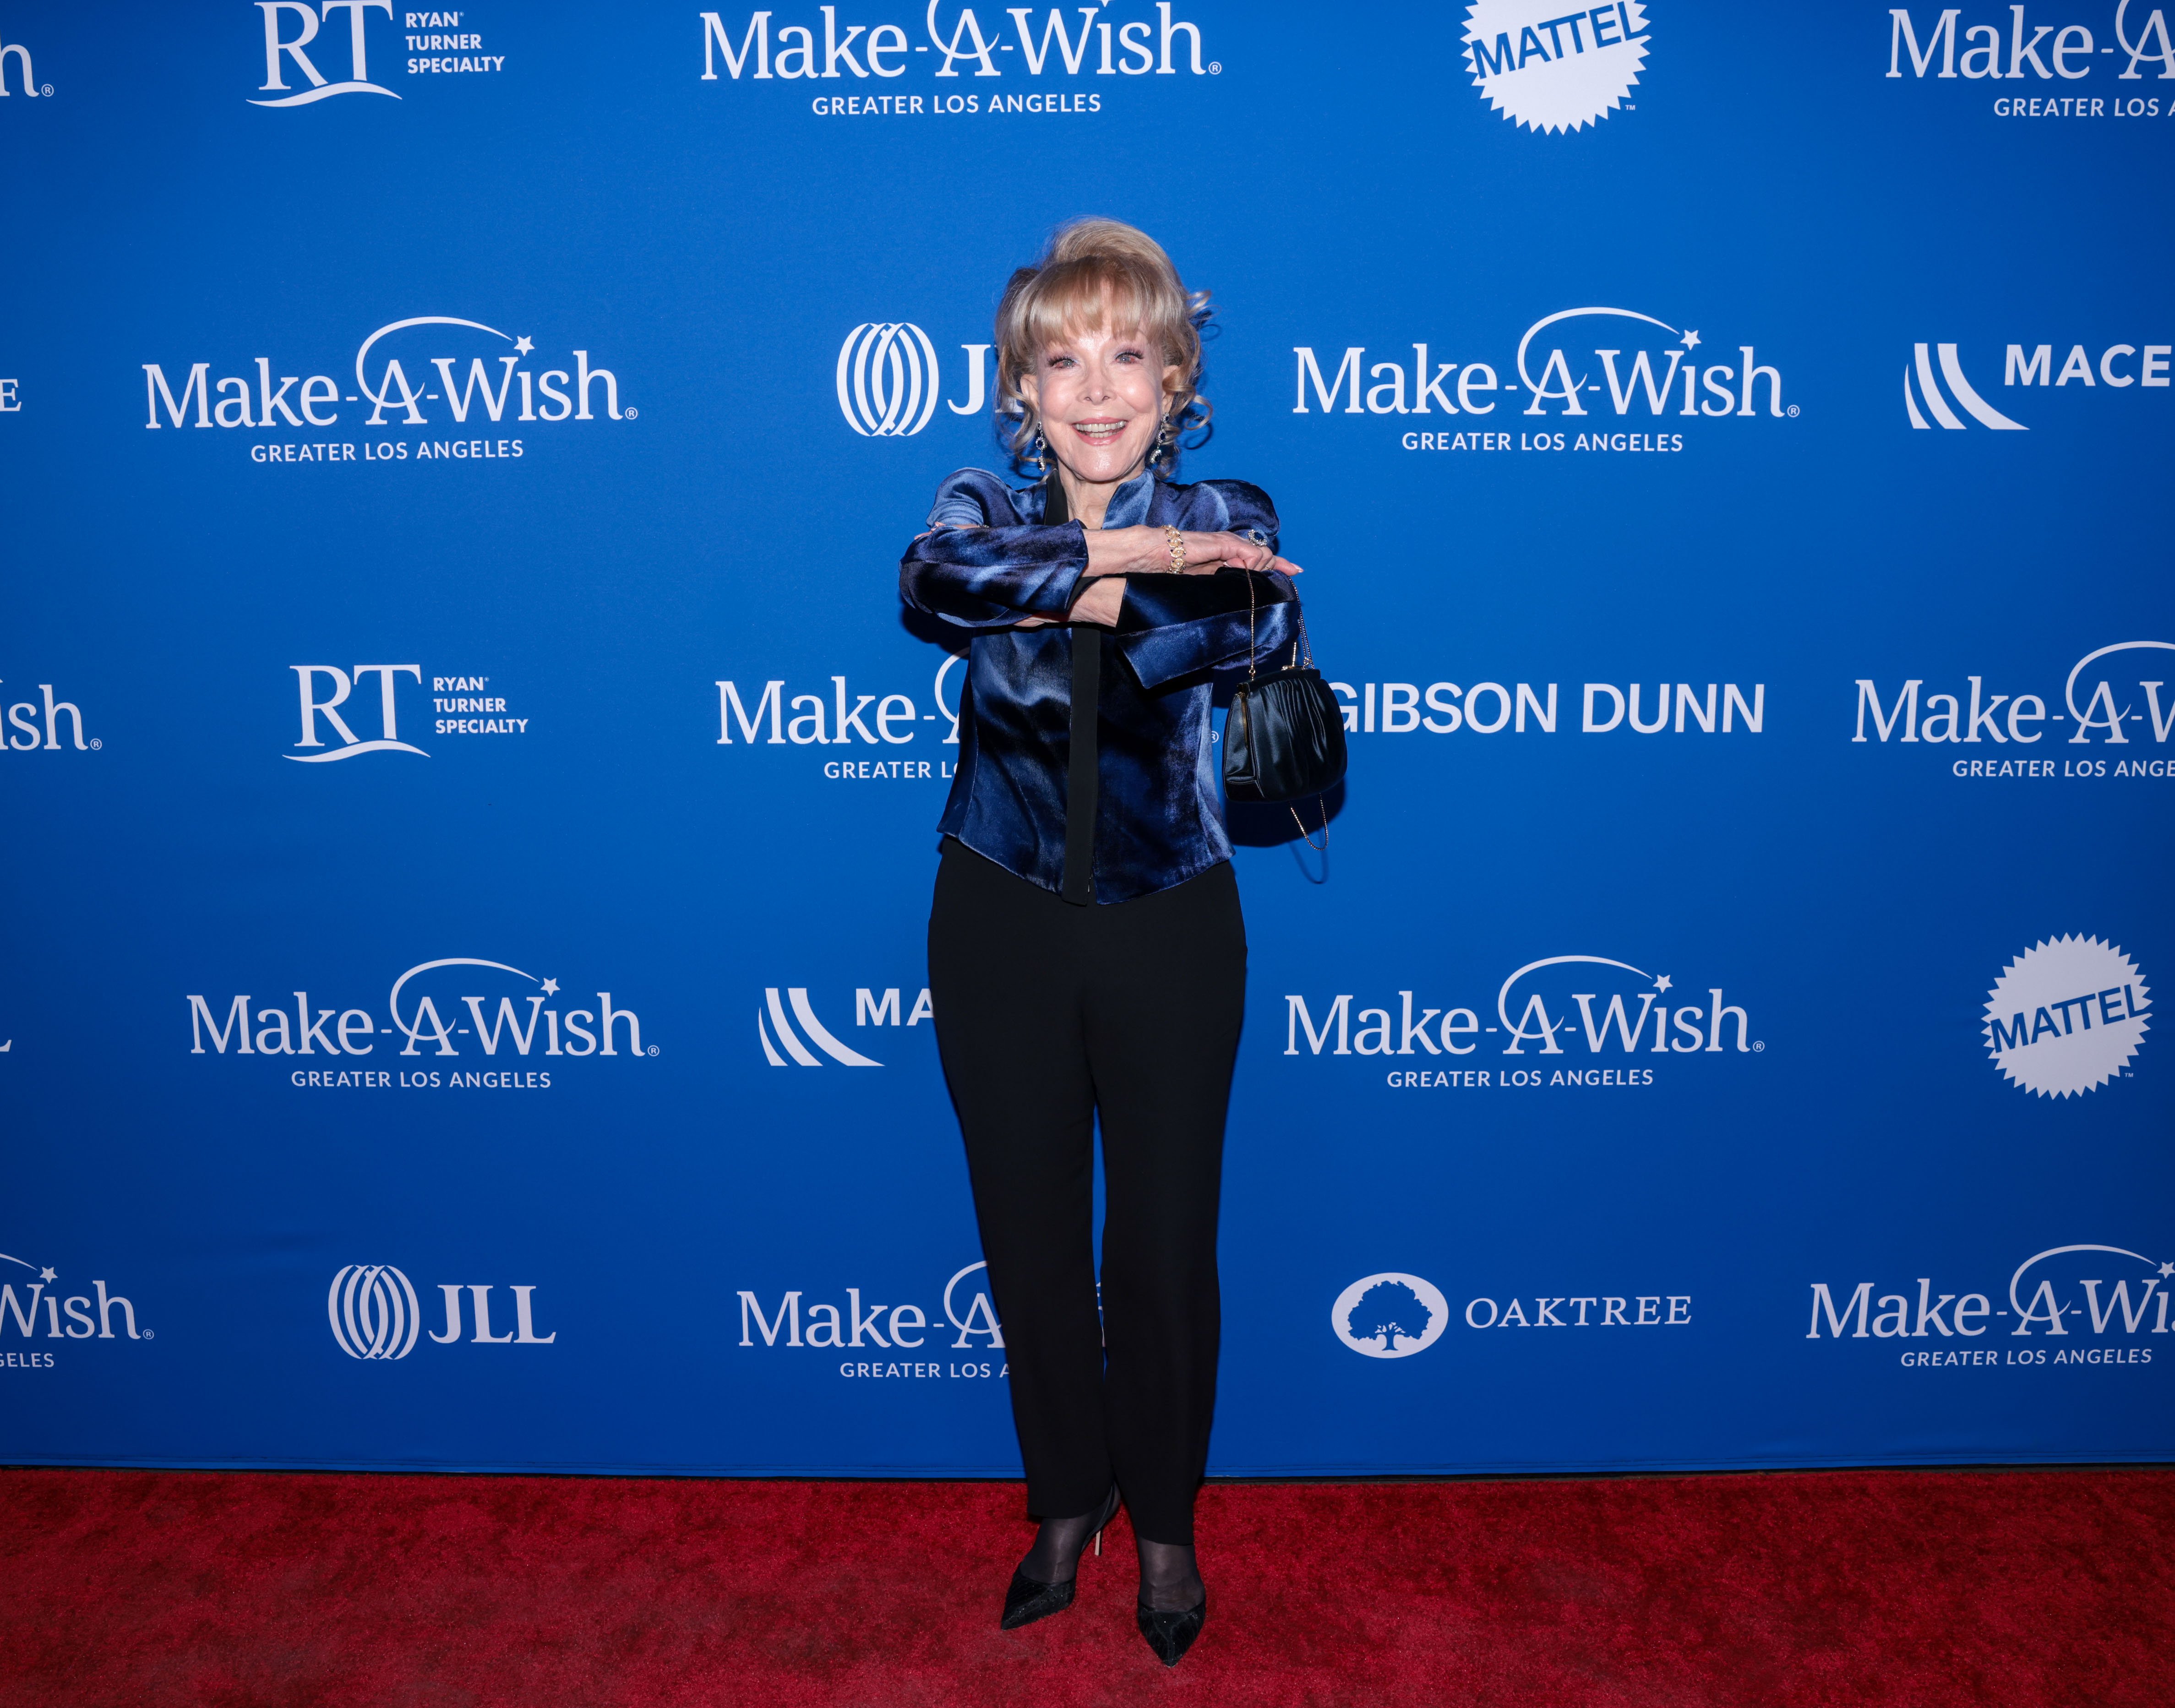 Barbara Eden attends Make-A-Wish Greater LA's Wish Gala 2022 presented by Gibson Dunn at Paramount Studios. | Source: Getty Images